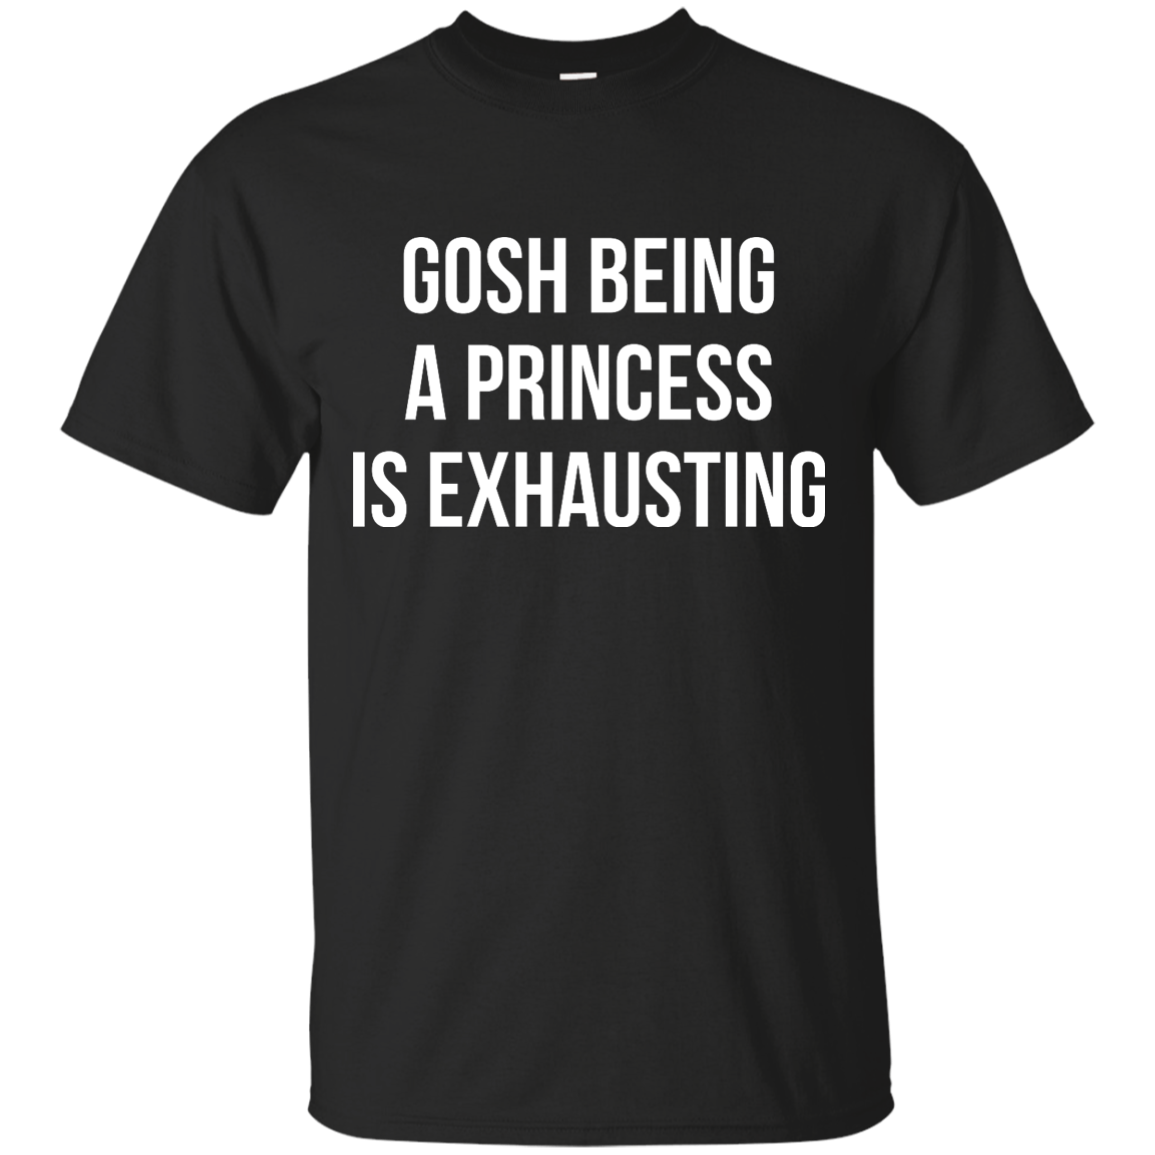 Gosh Being A Princess Is Exhausting shirt